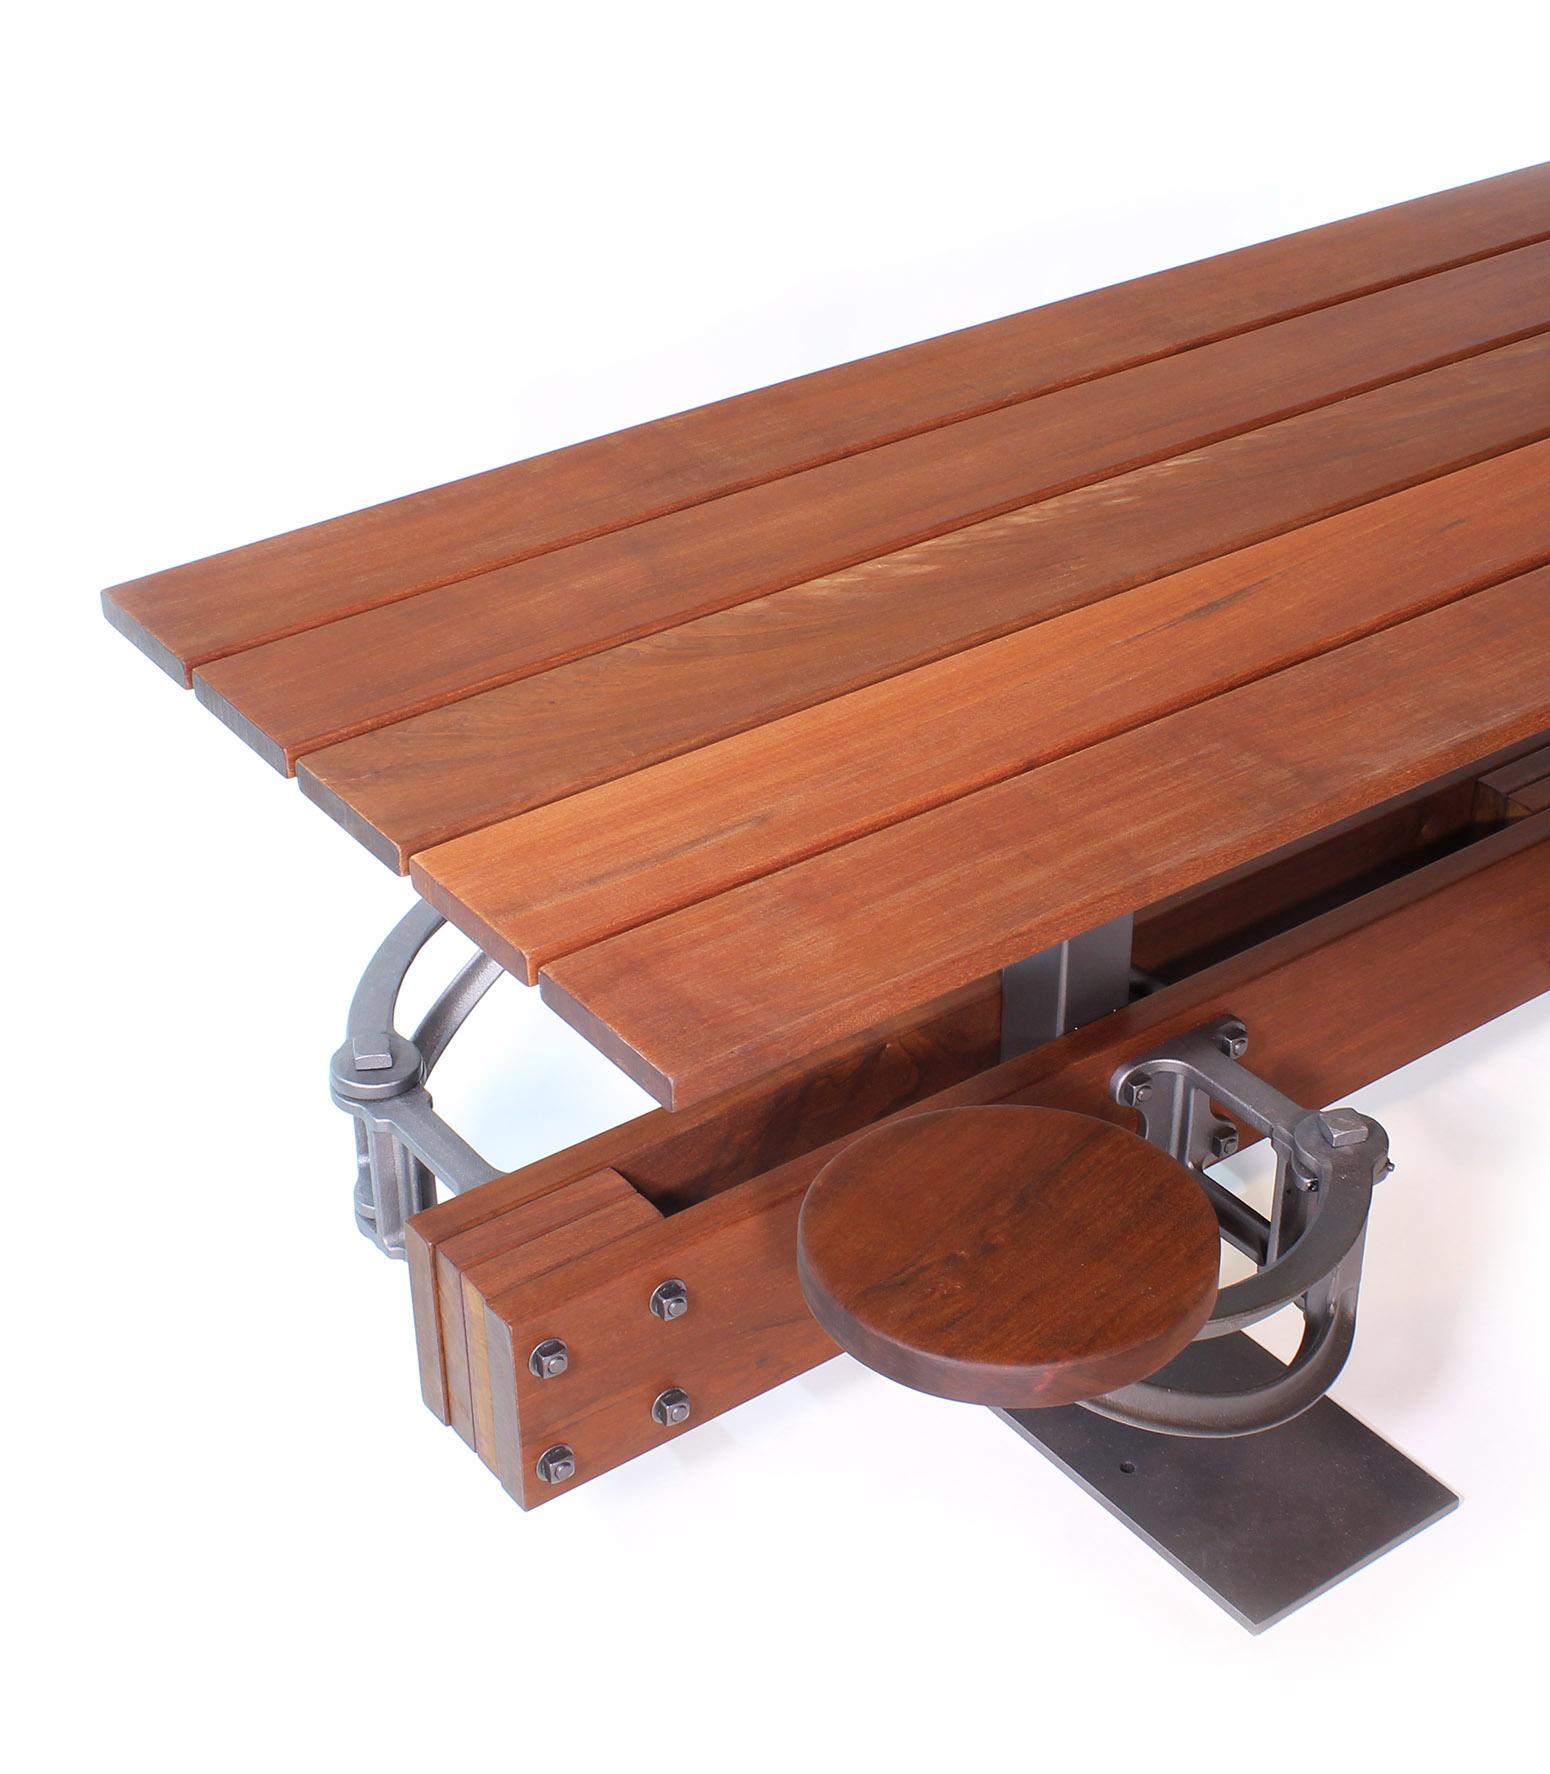 Contemporary Picnic Table, Outdoor Patio Dining Table with Swing Out Seats